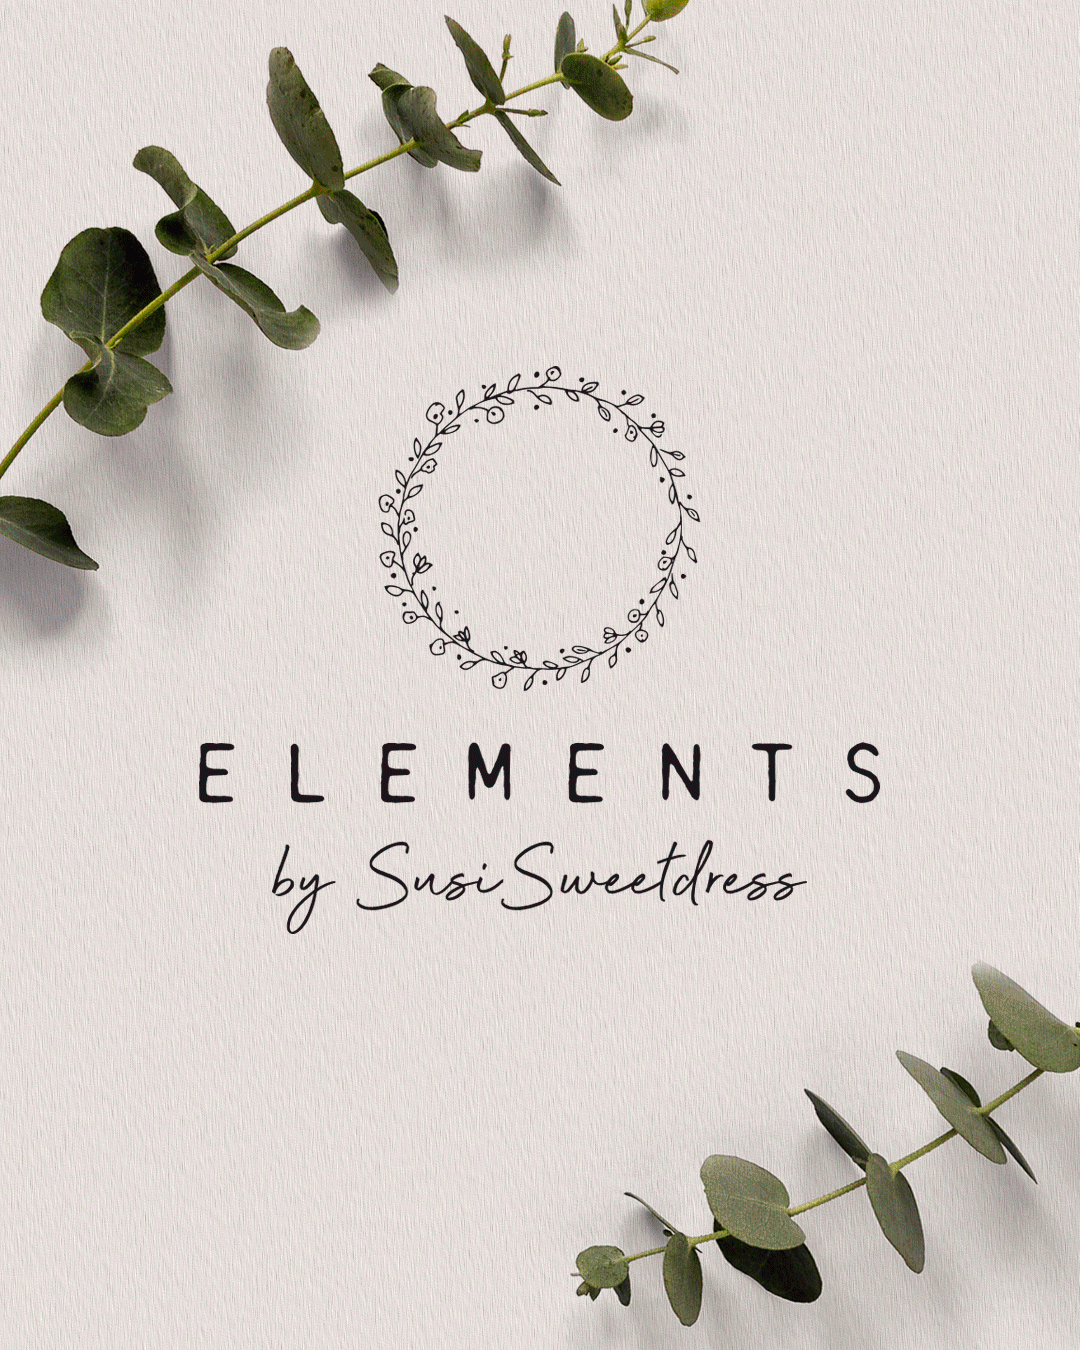 “Elements” New Collection by SusiSweetdress – Concept & Brand Identity